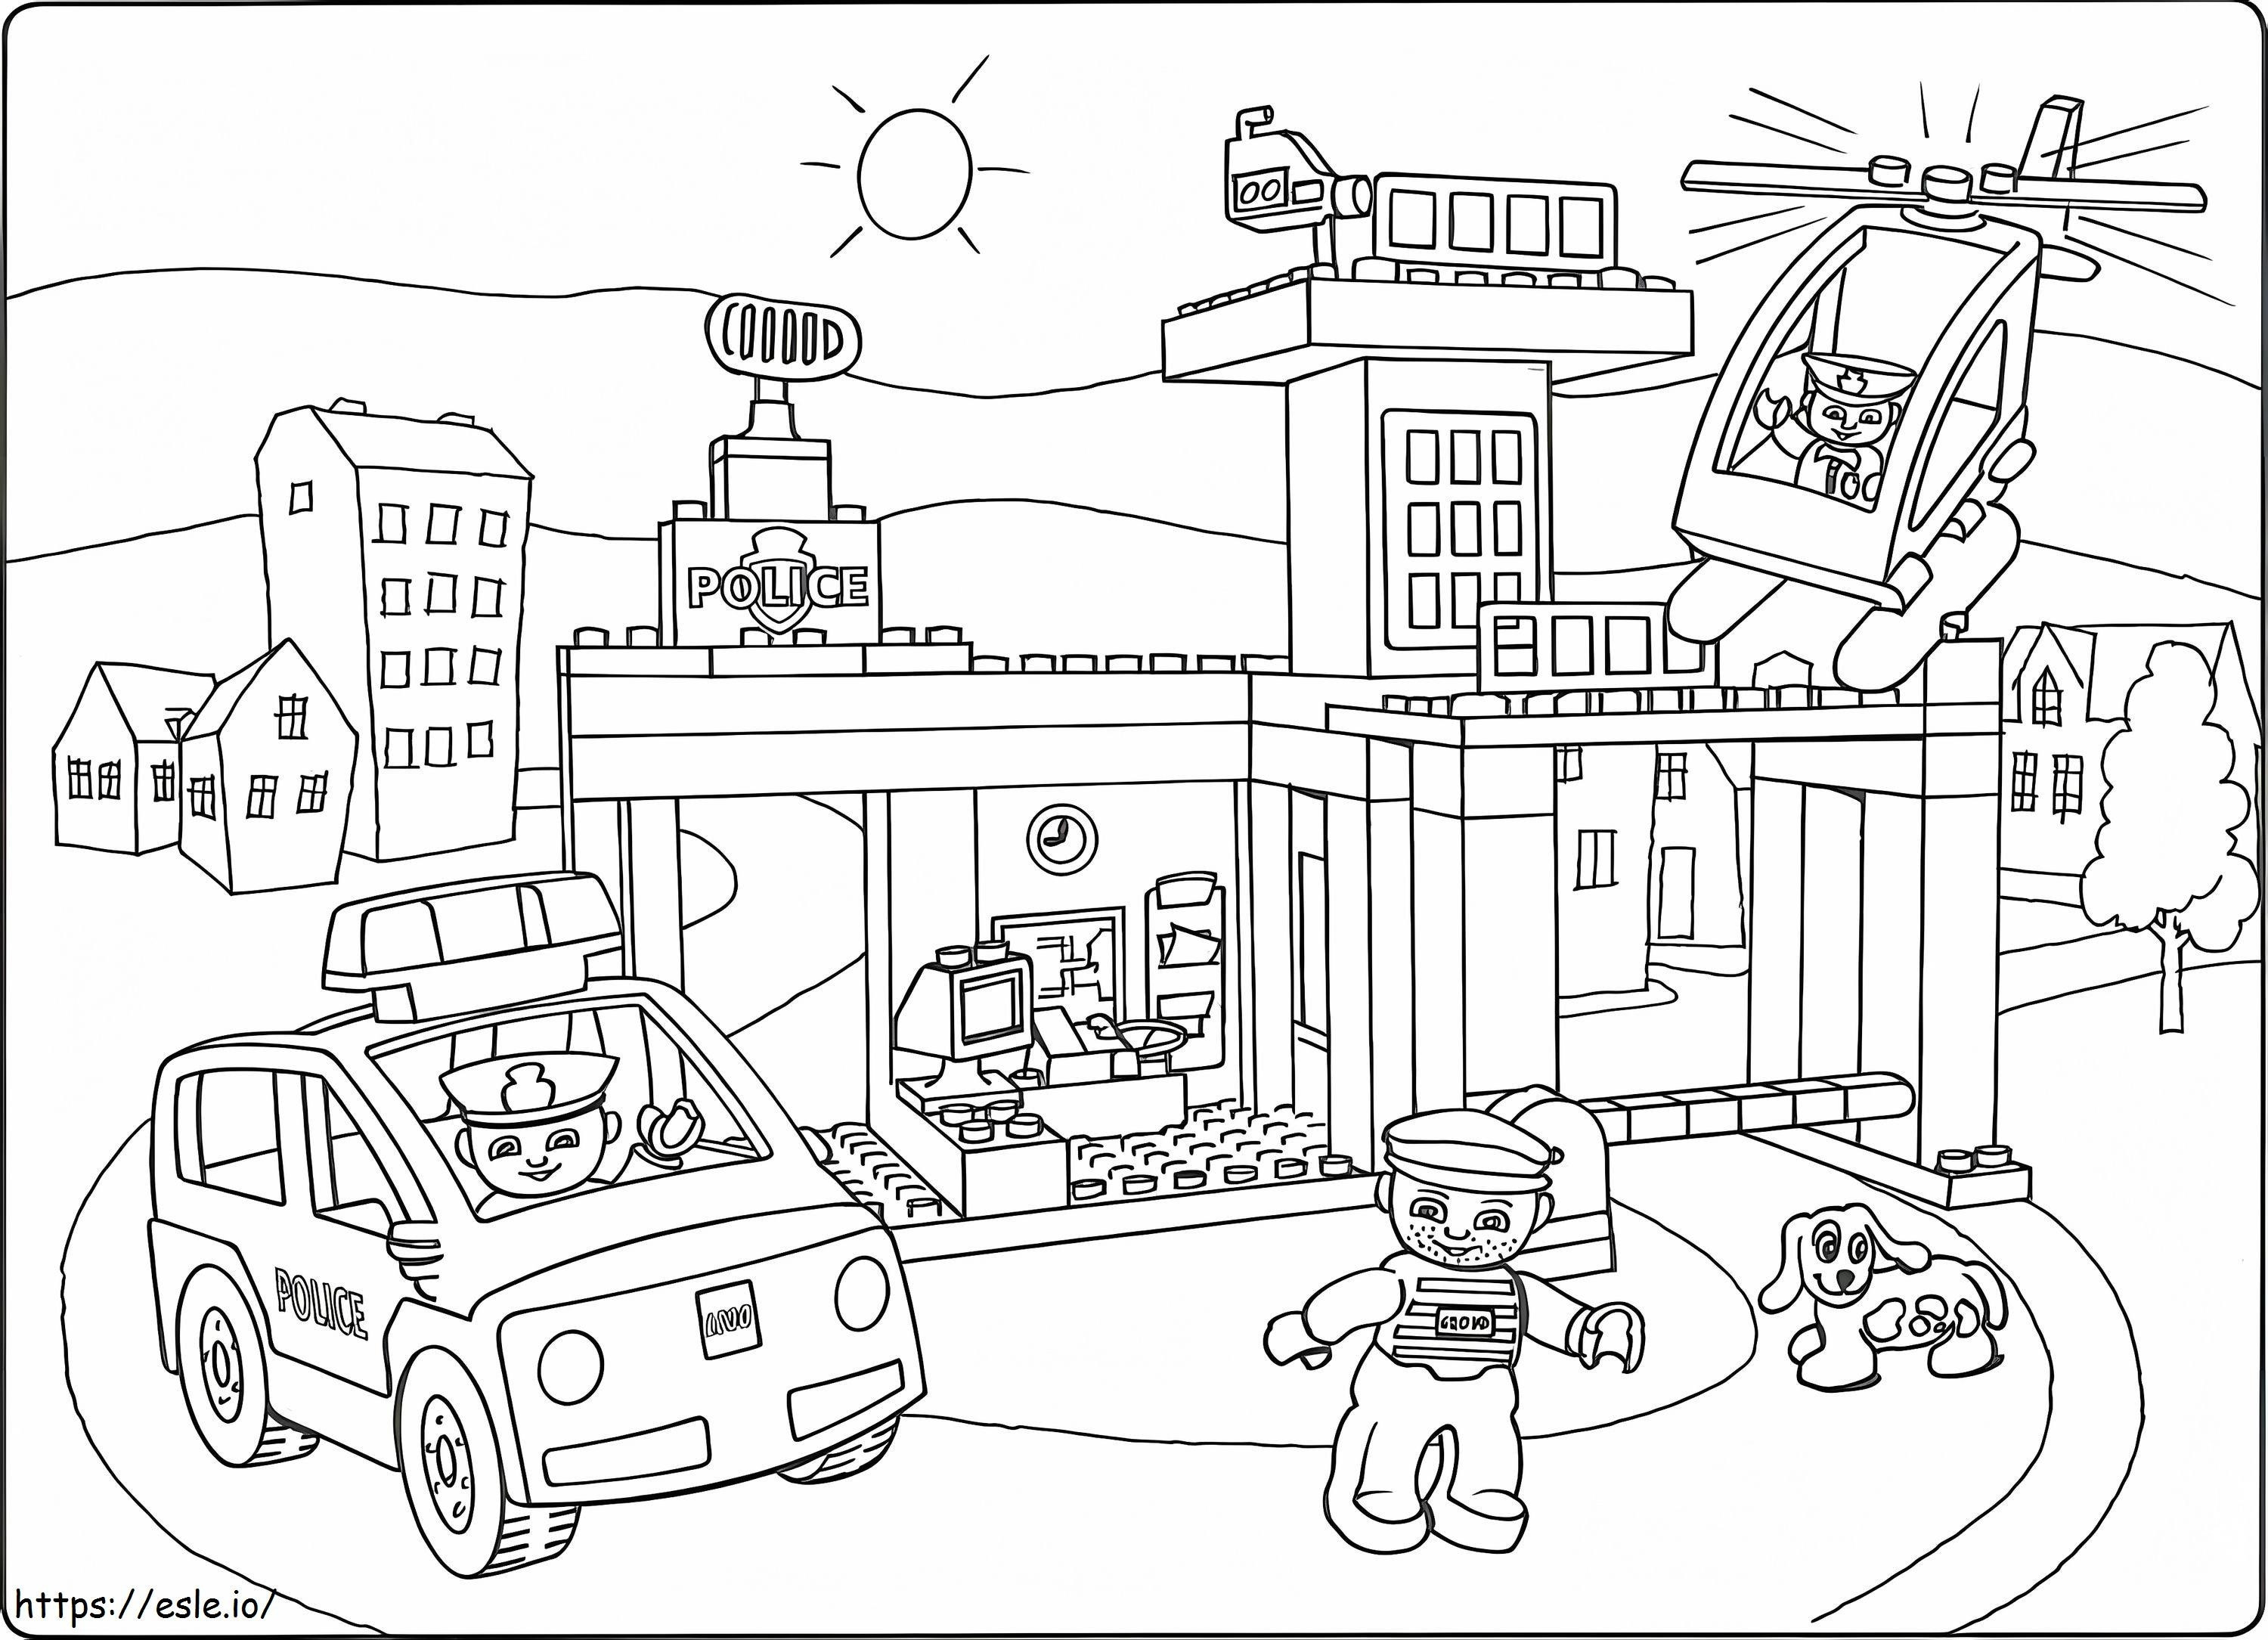 Lego Police Station coloring page